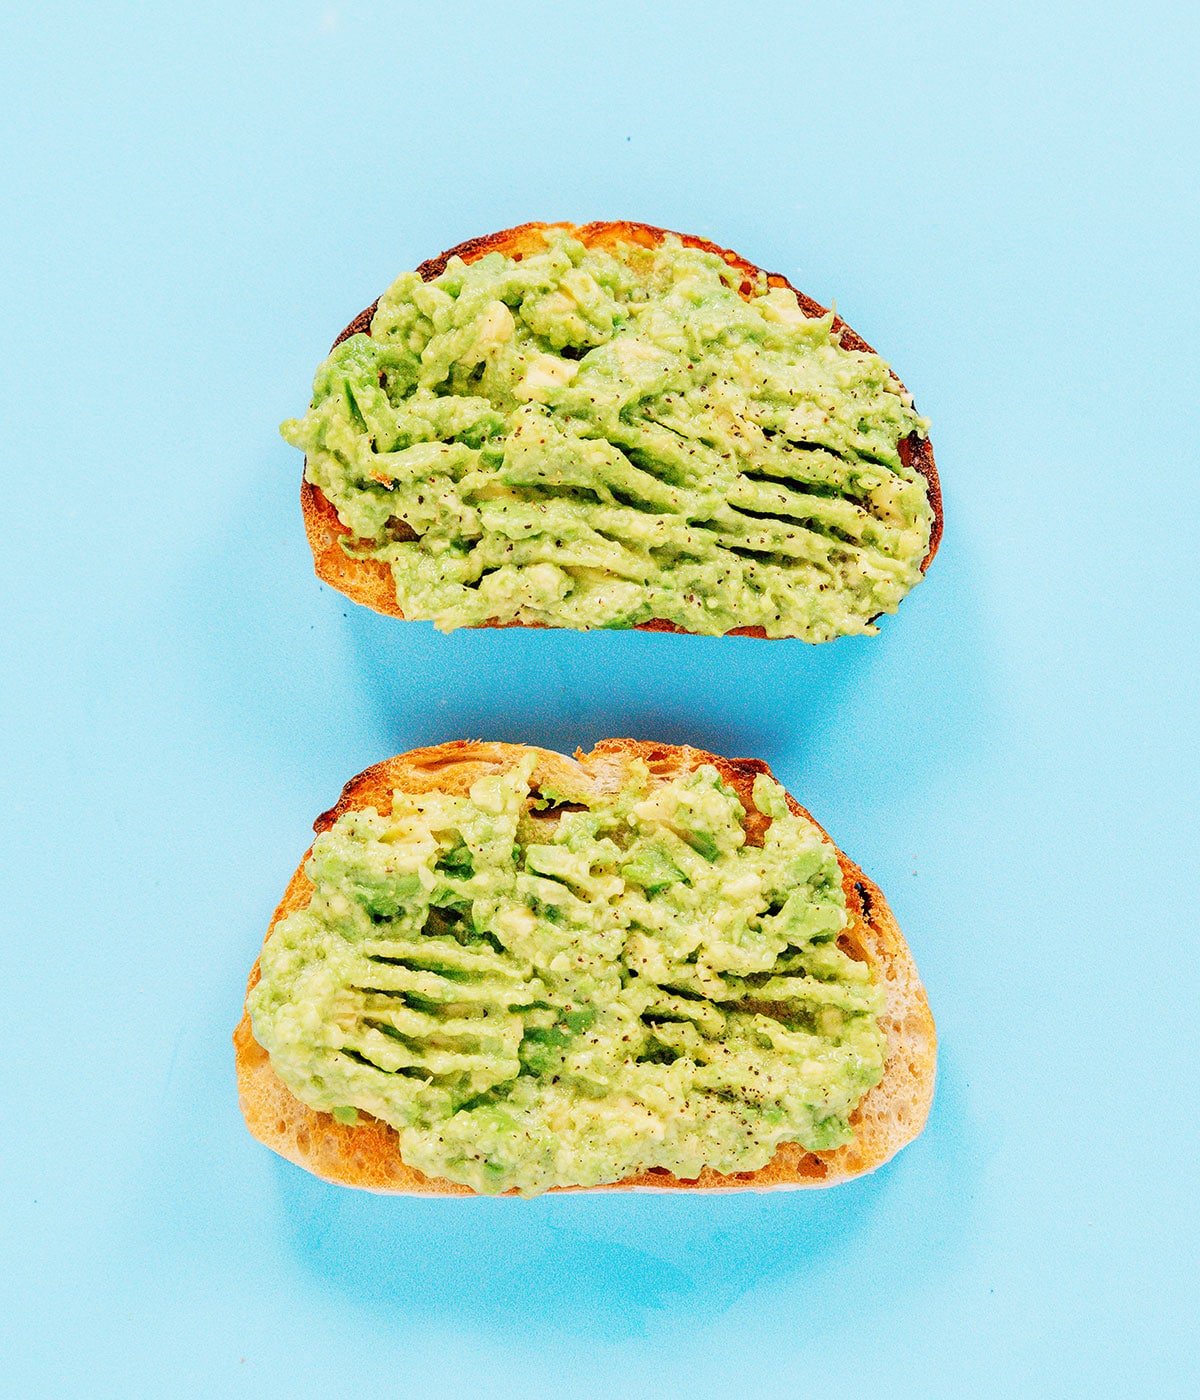 The classic toast with two pieces of toast topped with mashed avocado and lemon juice.